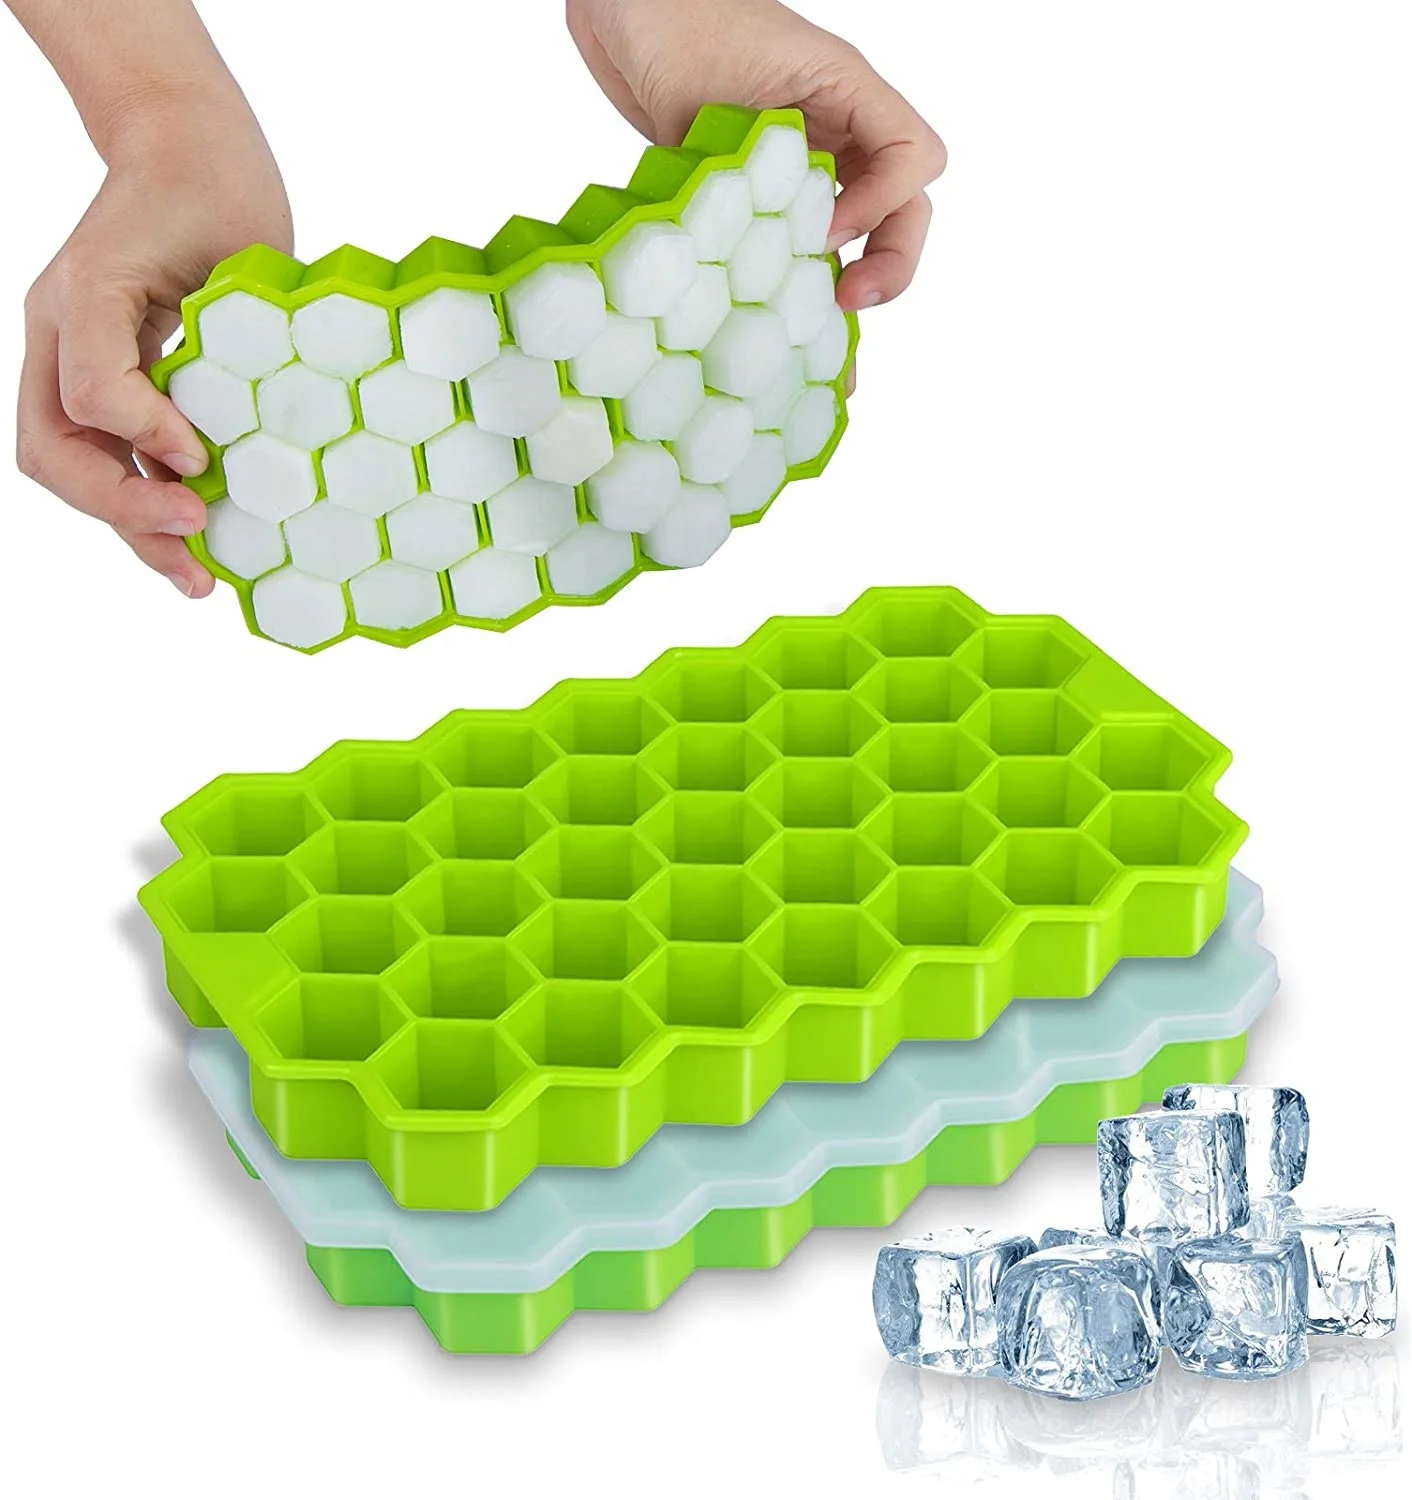 

Wholesale Bpa Free 37 Holes Honeycomb Shape Food Grade Silicone Ice Cube Maker Tray Molds With Lids, Purple,blue,green,yellow,red,orange,custom